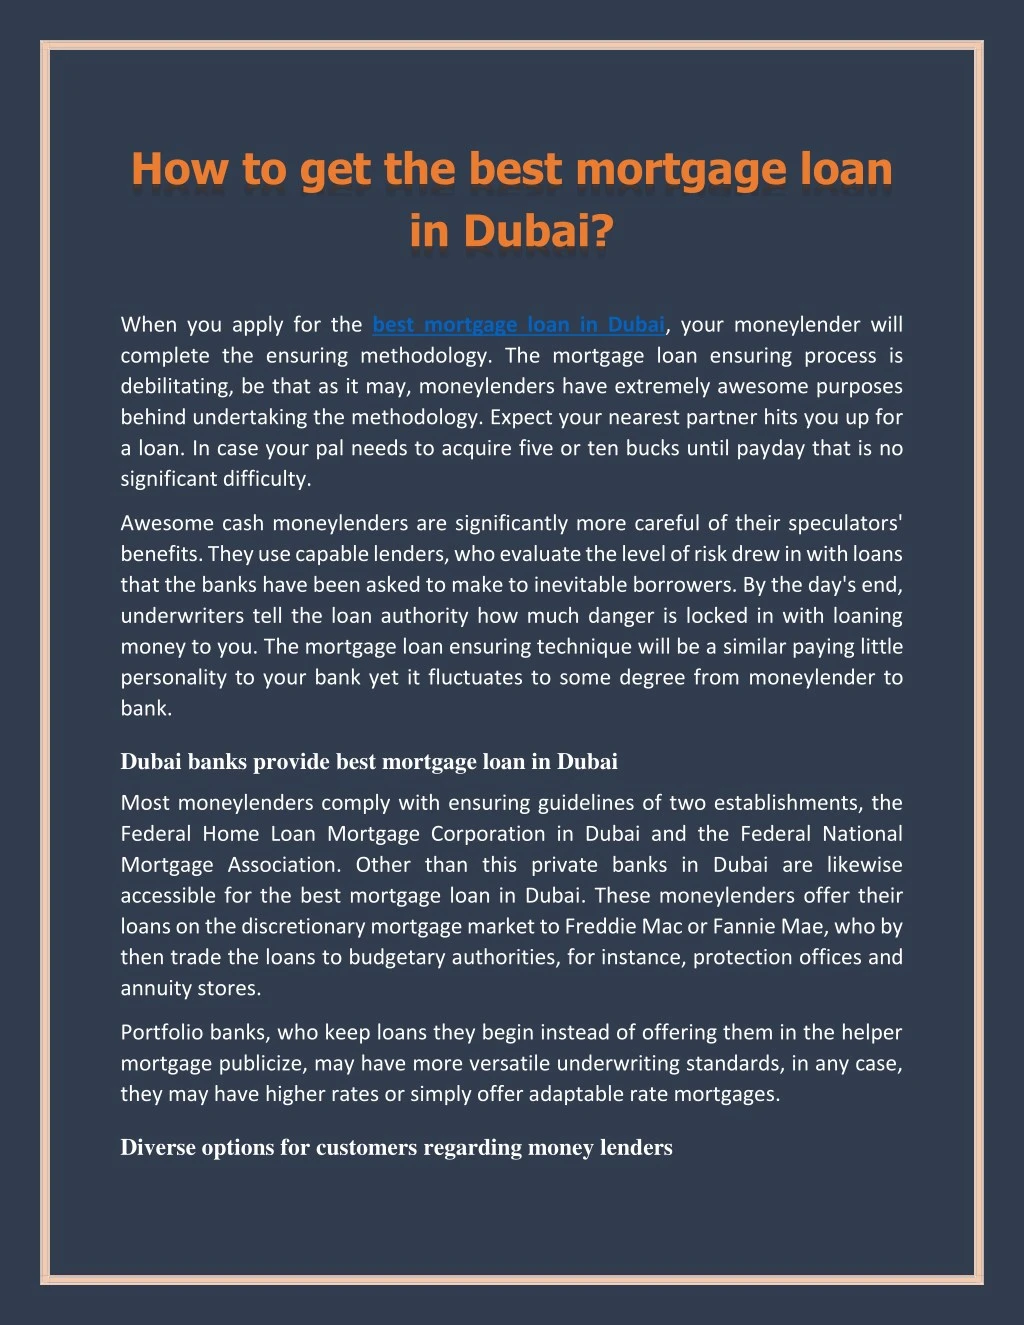 how to get the best mortgage loan in dubai